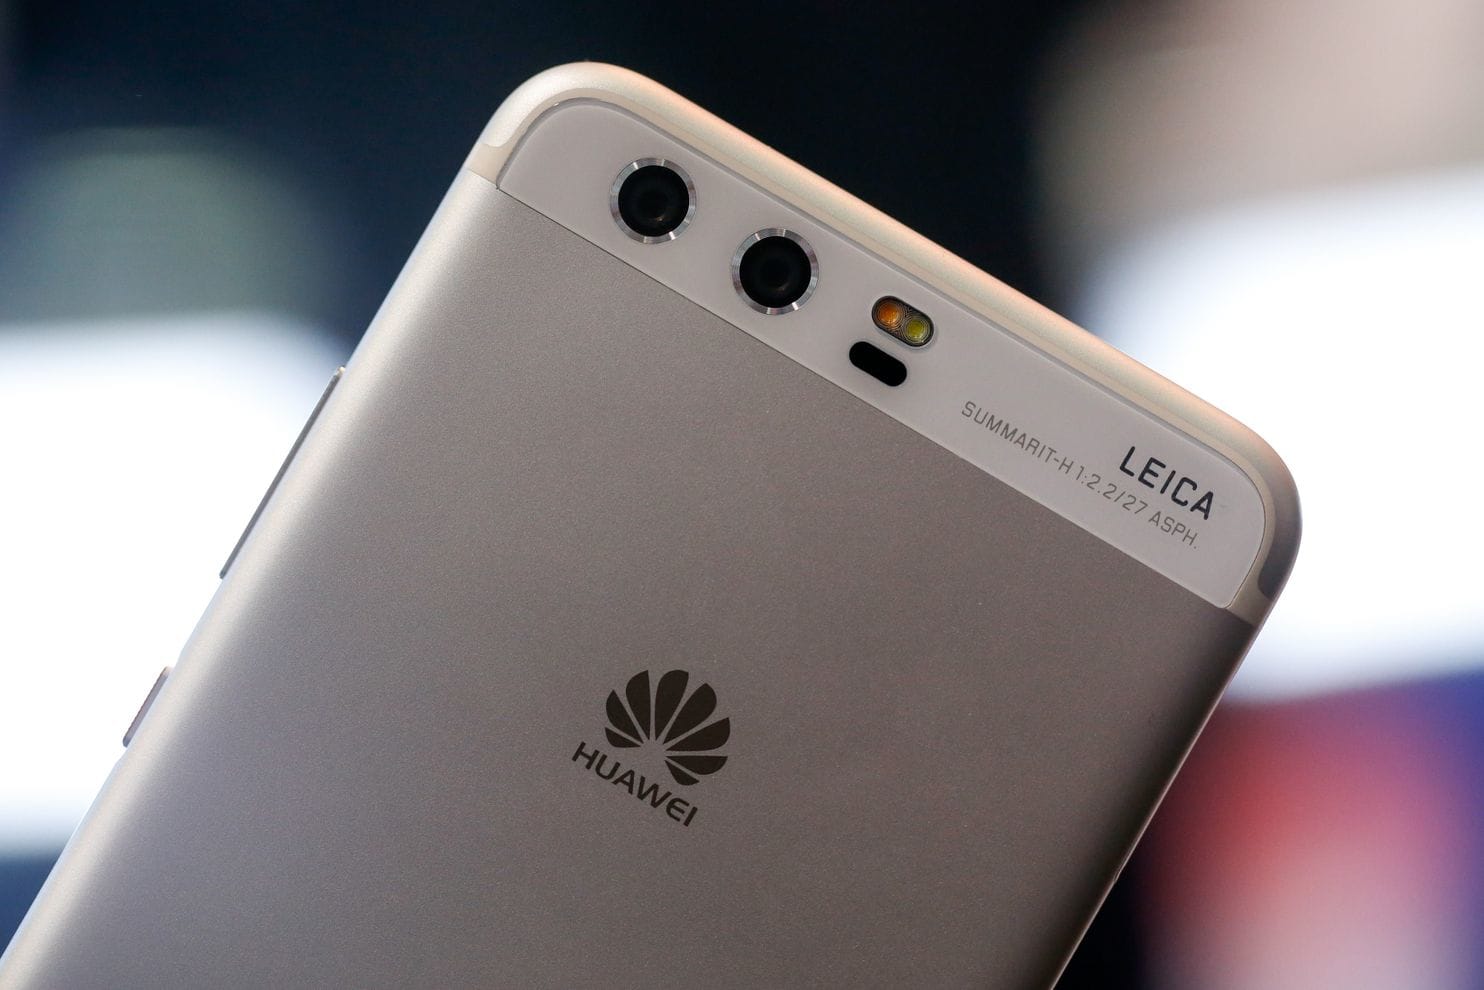 Huawei has shipped an impressive 100 million devices in 2019